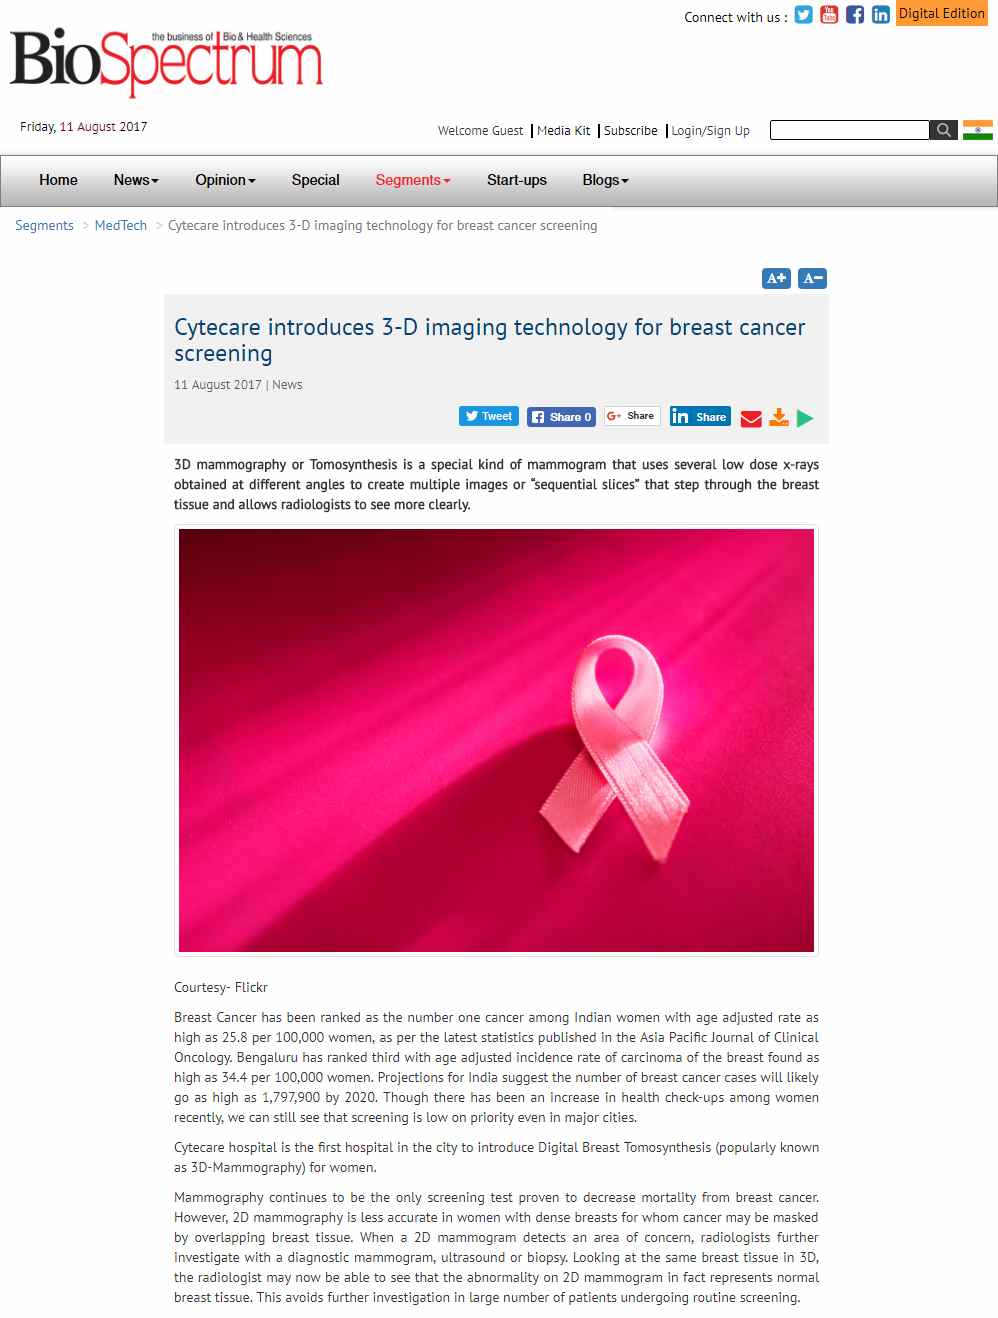 Cytecare Introduces 3-D Imaging Technology for Breast Cancer Screening